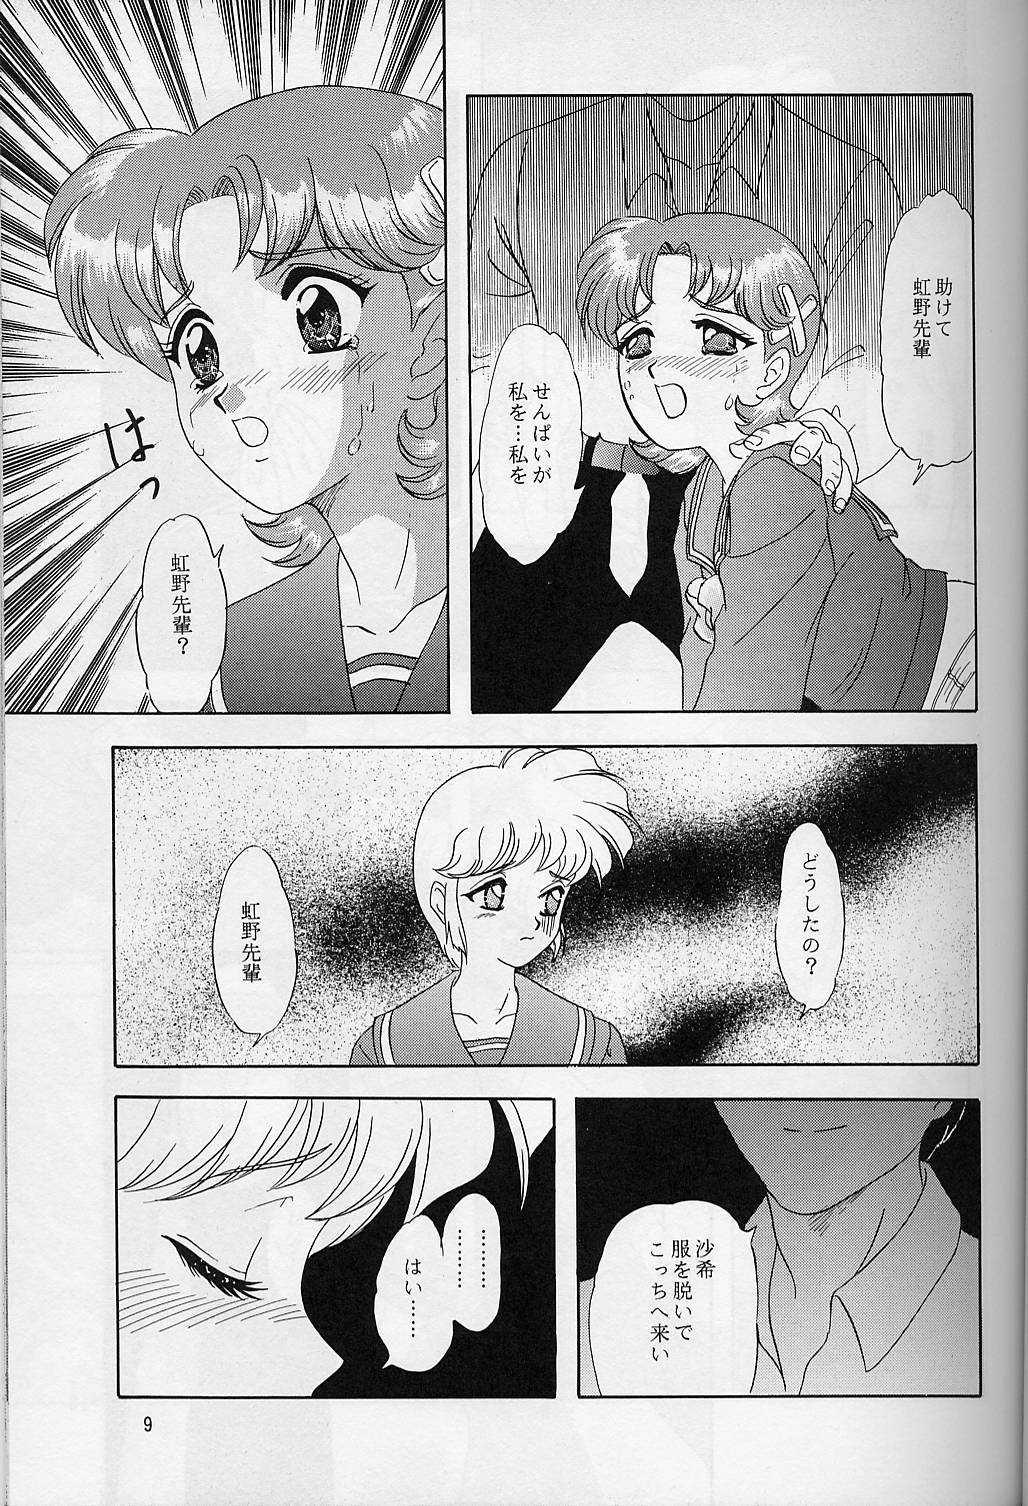 Matures Lunch Box 30 - Lunch Time 10 - Tokimeki memorial Hot Teen - Page 8